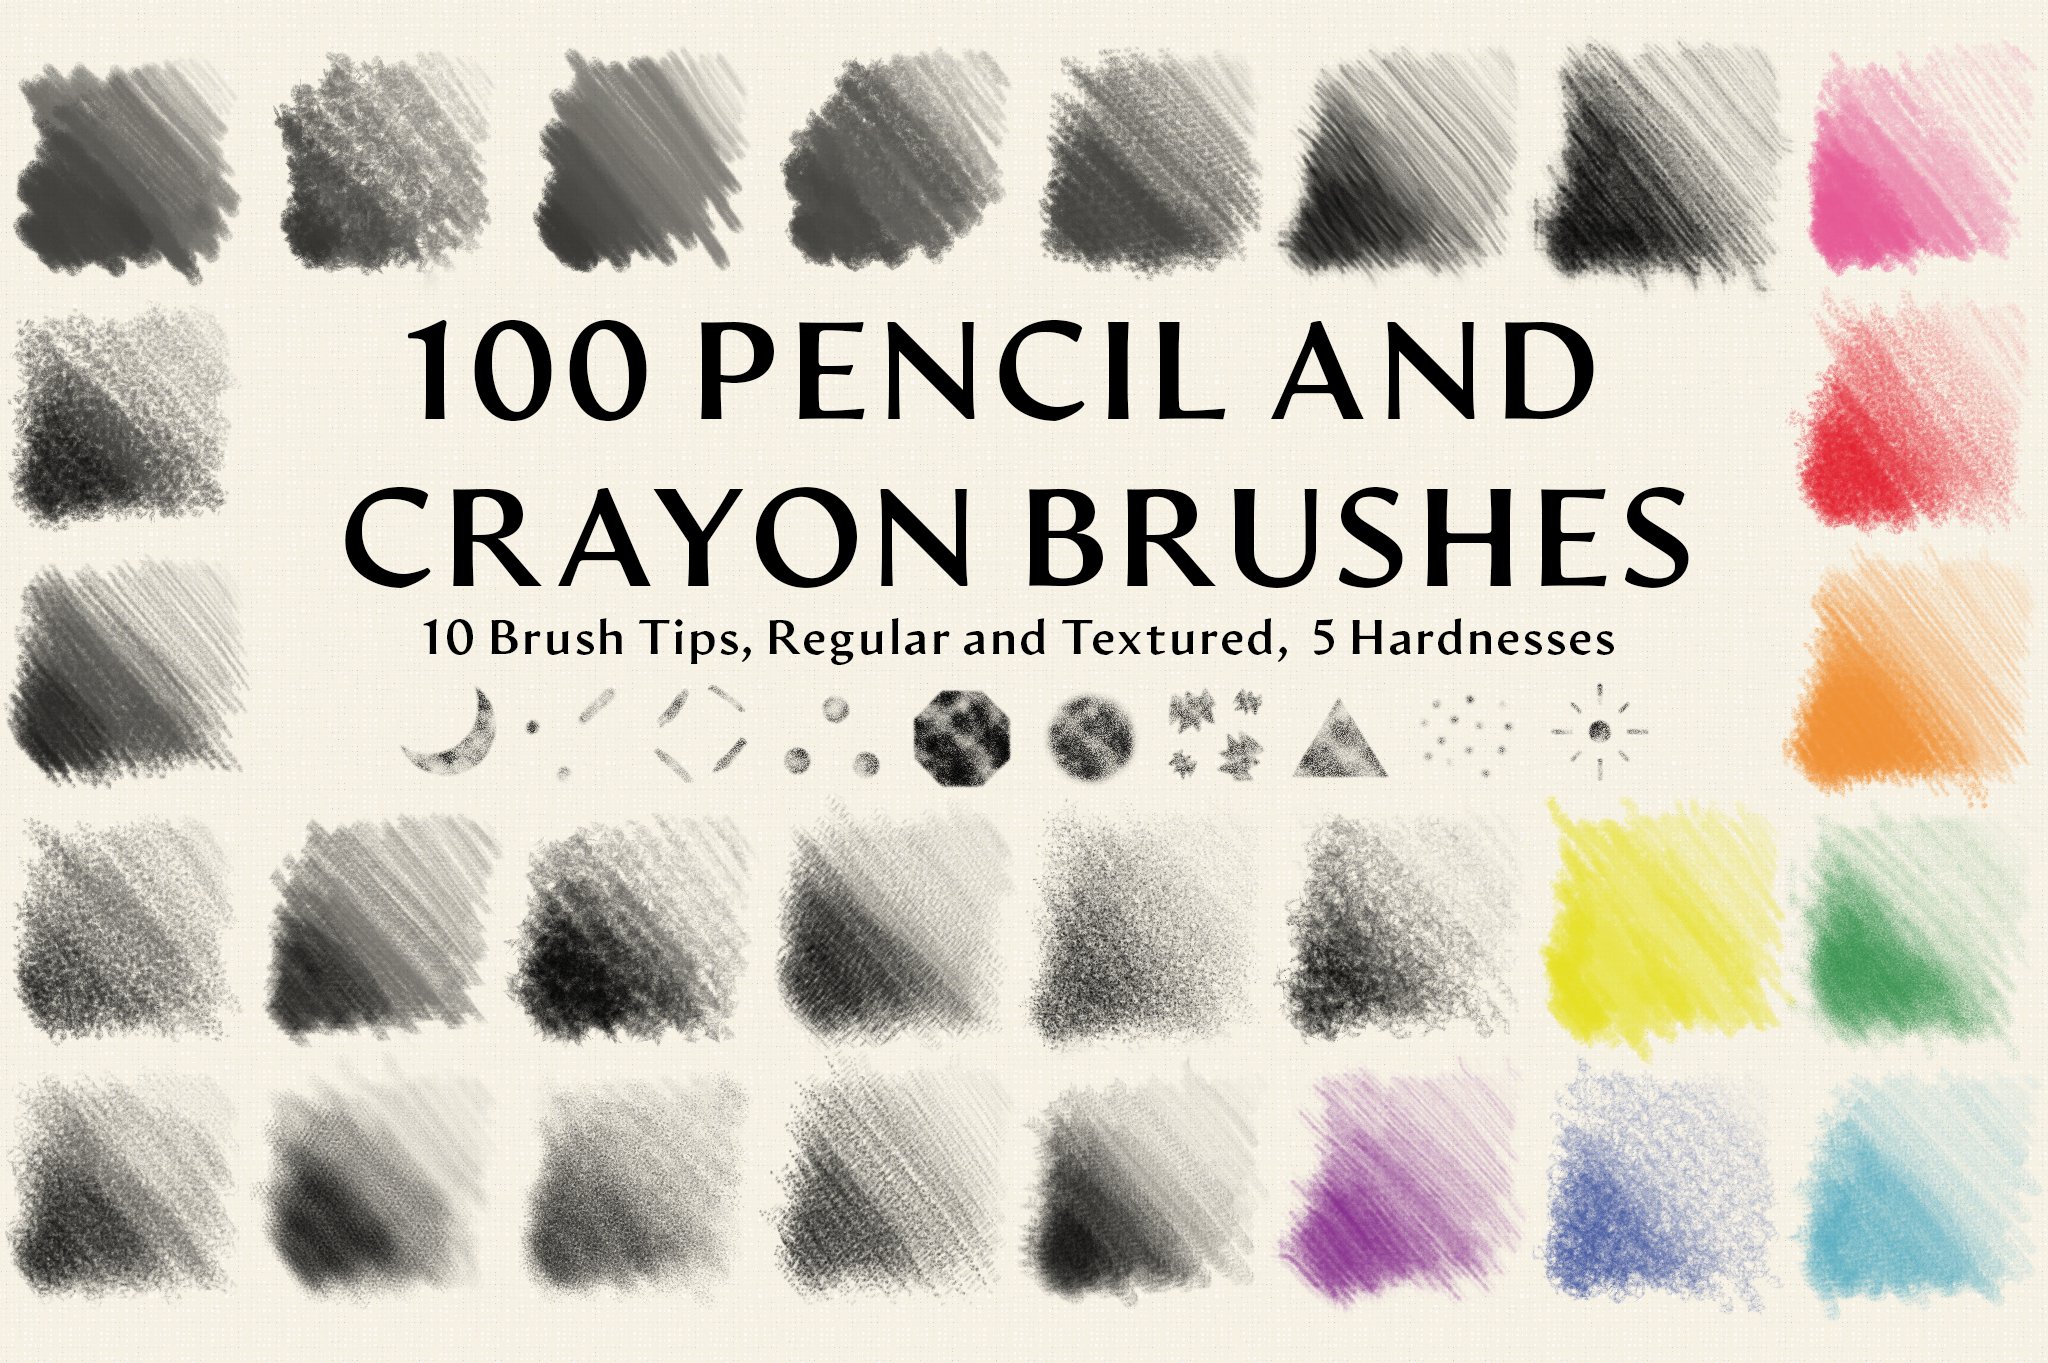 100 Pencil and Crayon Brushescover image.